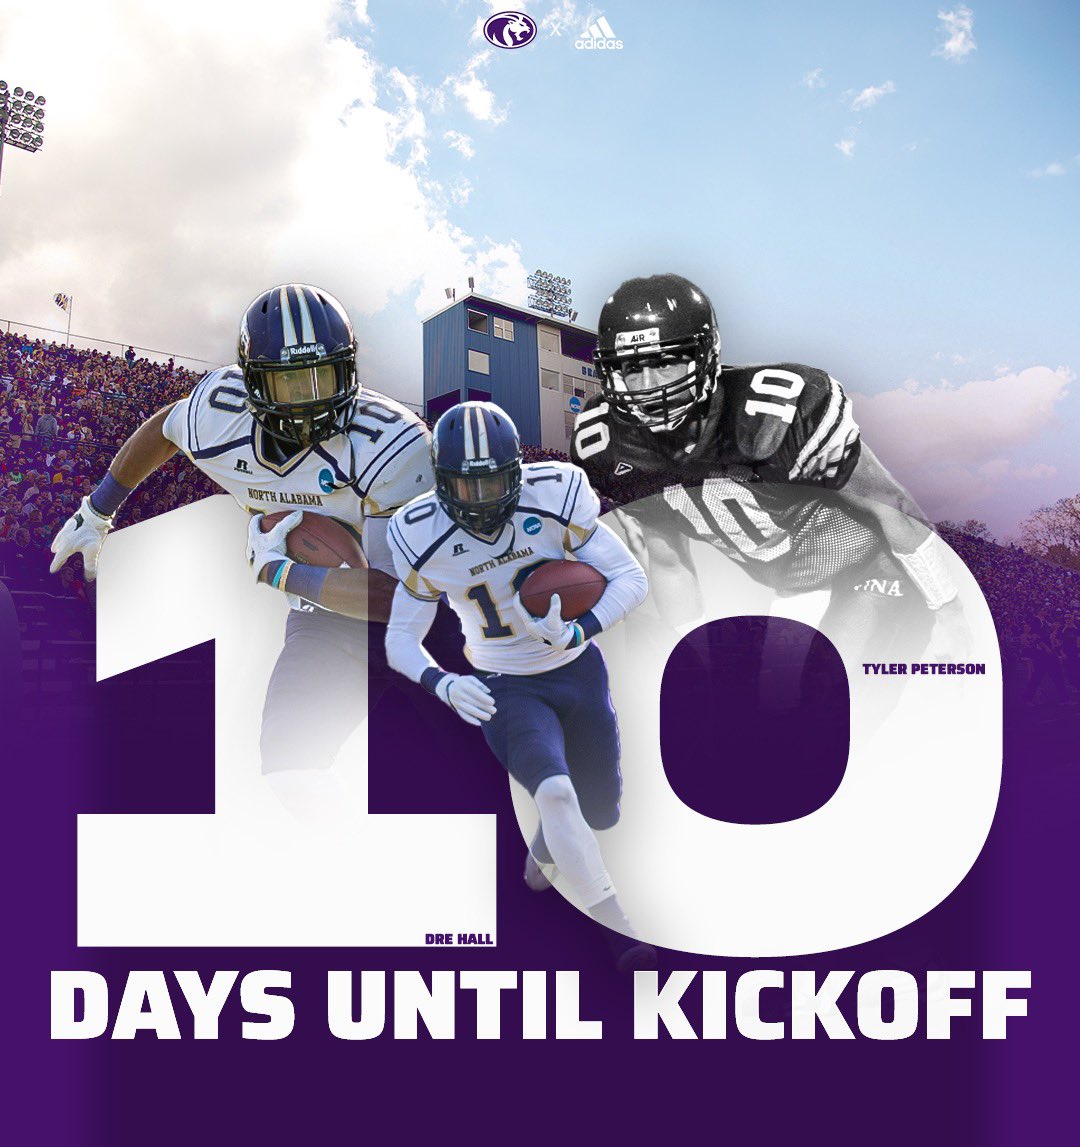 1️⃣0️⃣ more days ‼️ We’re almost in the single digits! Today, we honor 1,000 yard receiver Dre Hall and late 90s quarterback legend Tyler Peterson! Get your FCS Kickoff tickets today! 🎟: tinyurl.com/FCSKickoffPrem… 🎟: tinyurl.com/FCSKickoffGene… #PrideInOurPast | #RoarLions 🦁